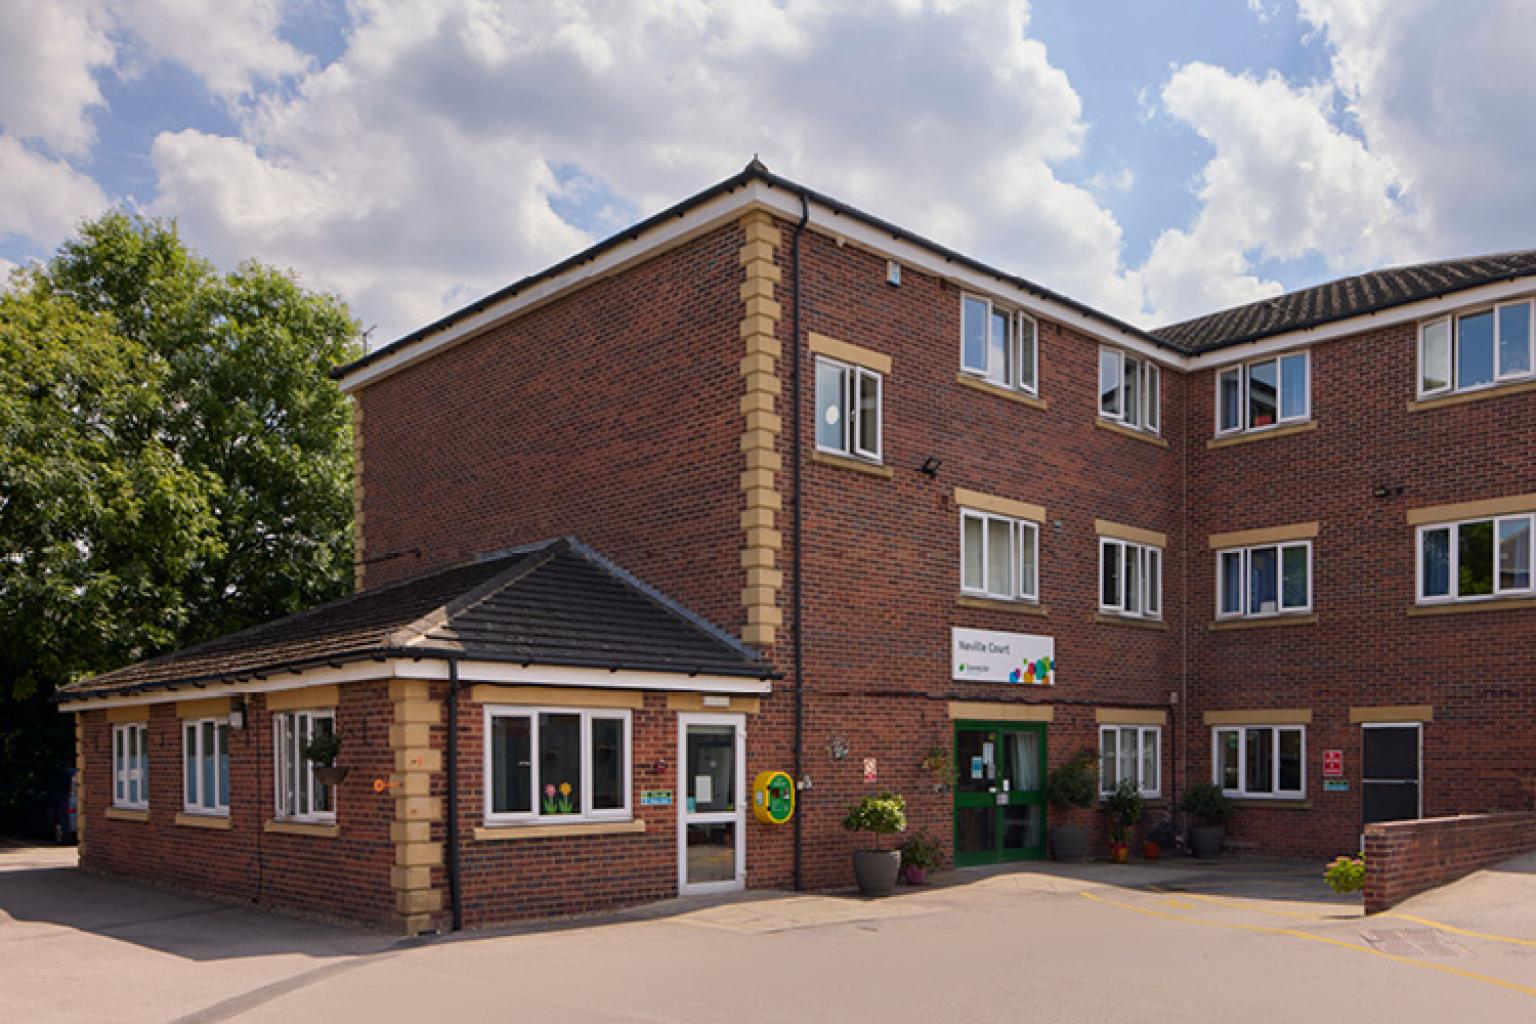 Neville Court care home in Barnsley